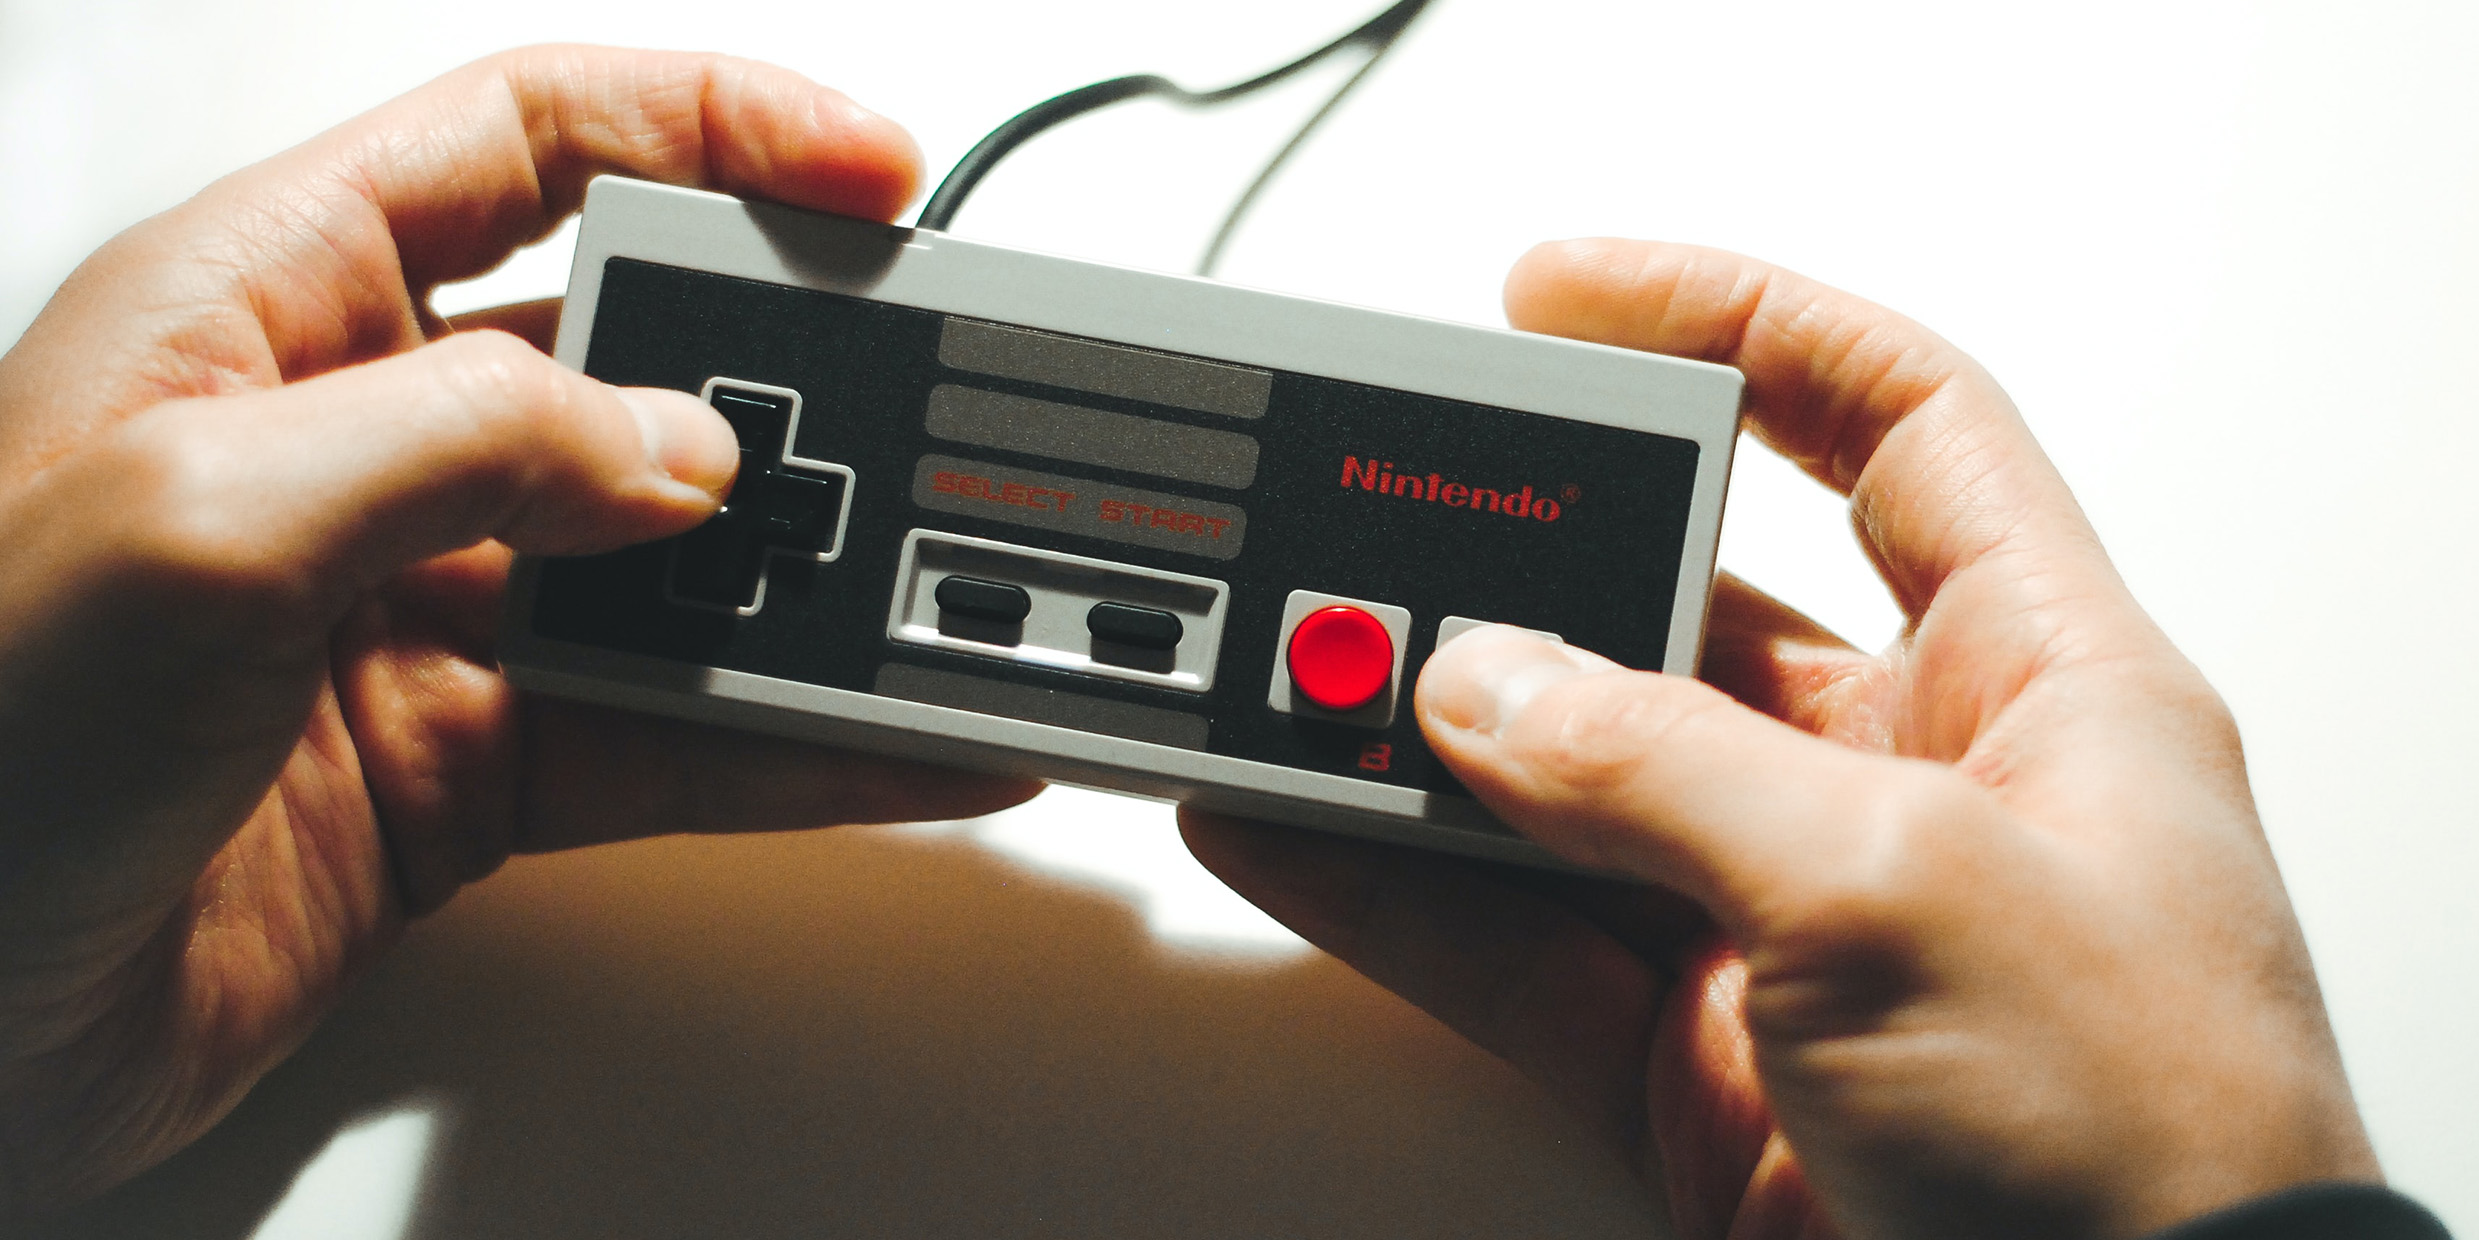 Image of a pair of hands holding a game controller